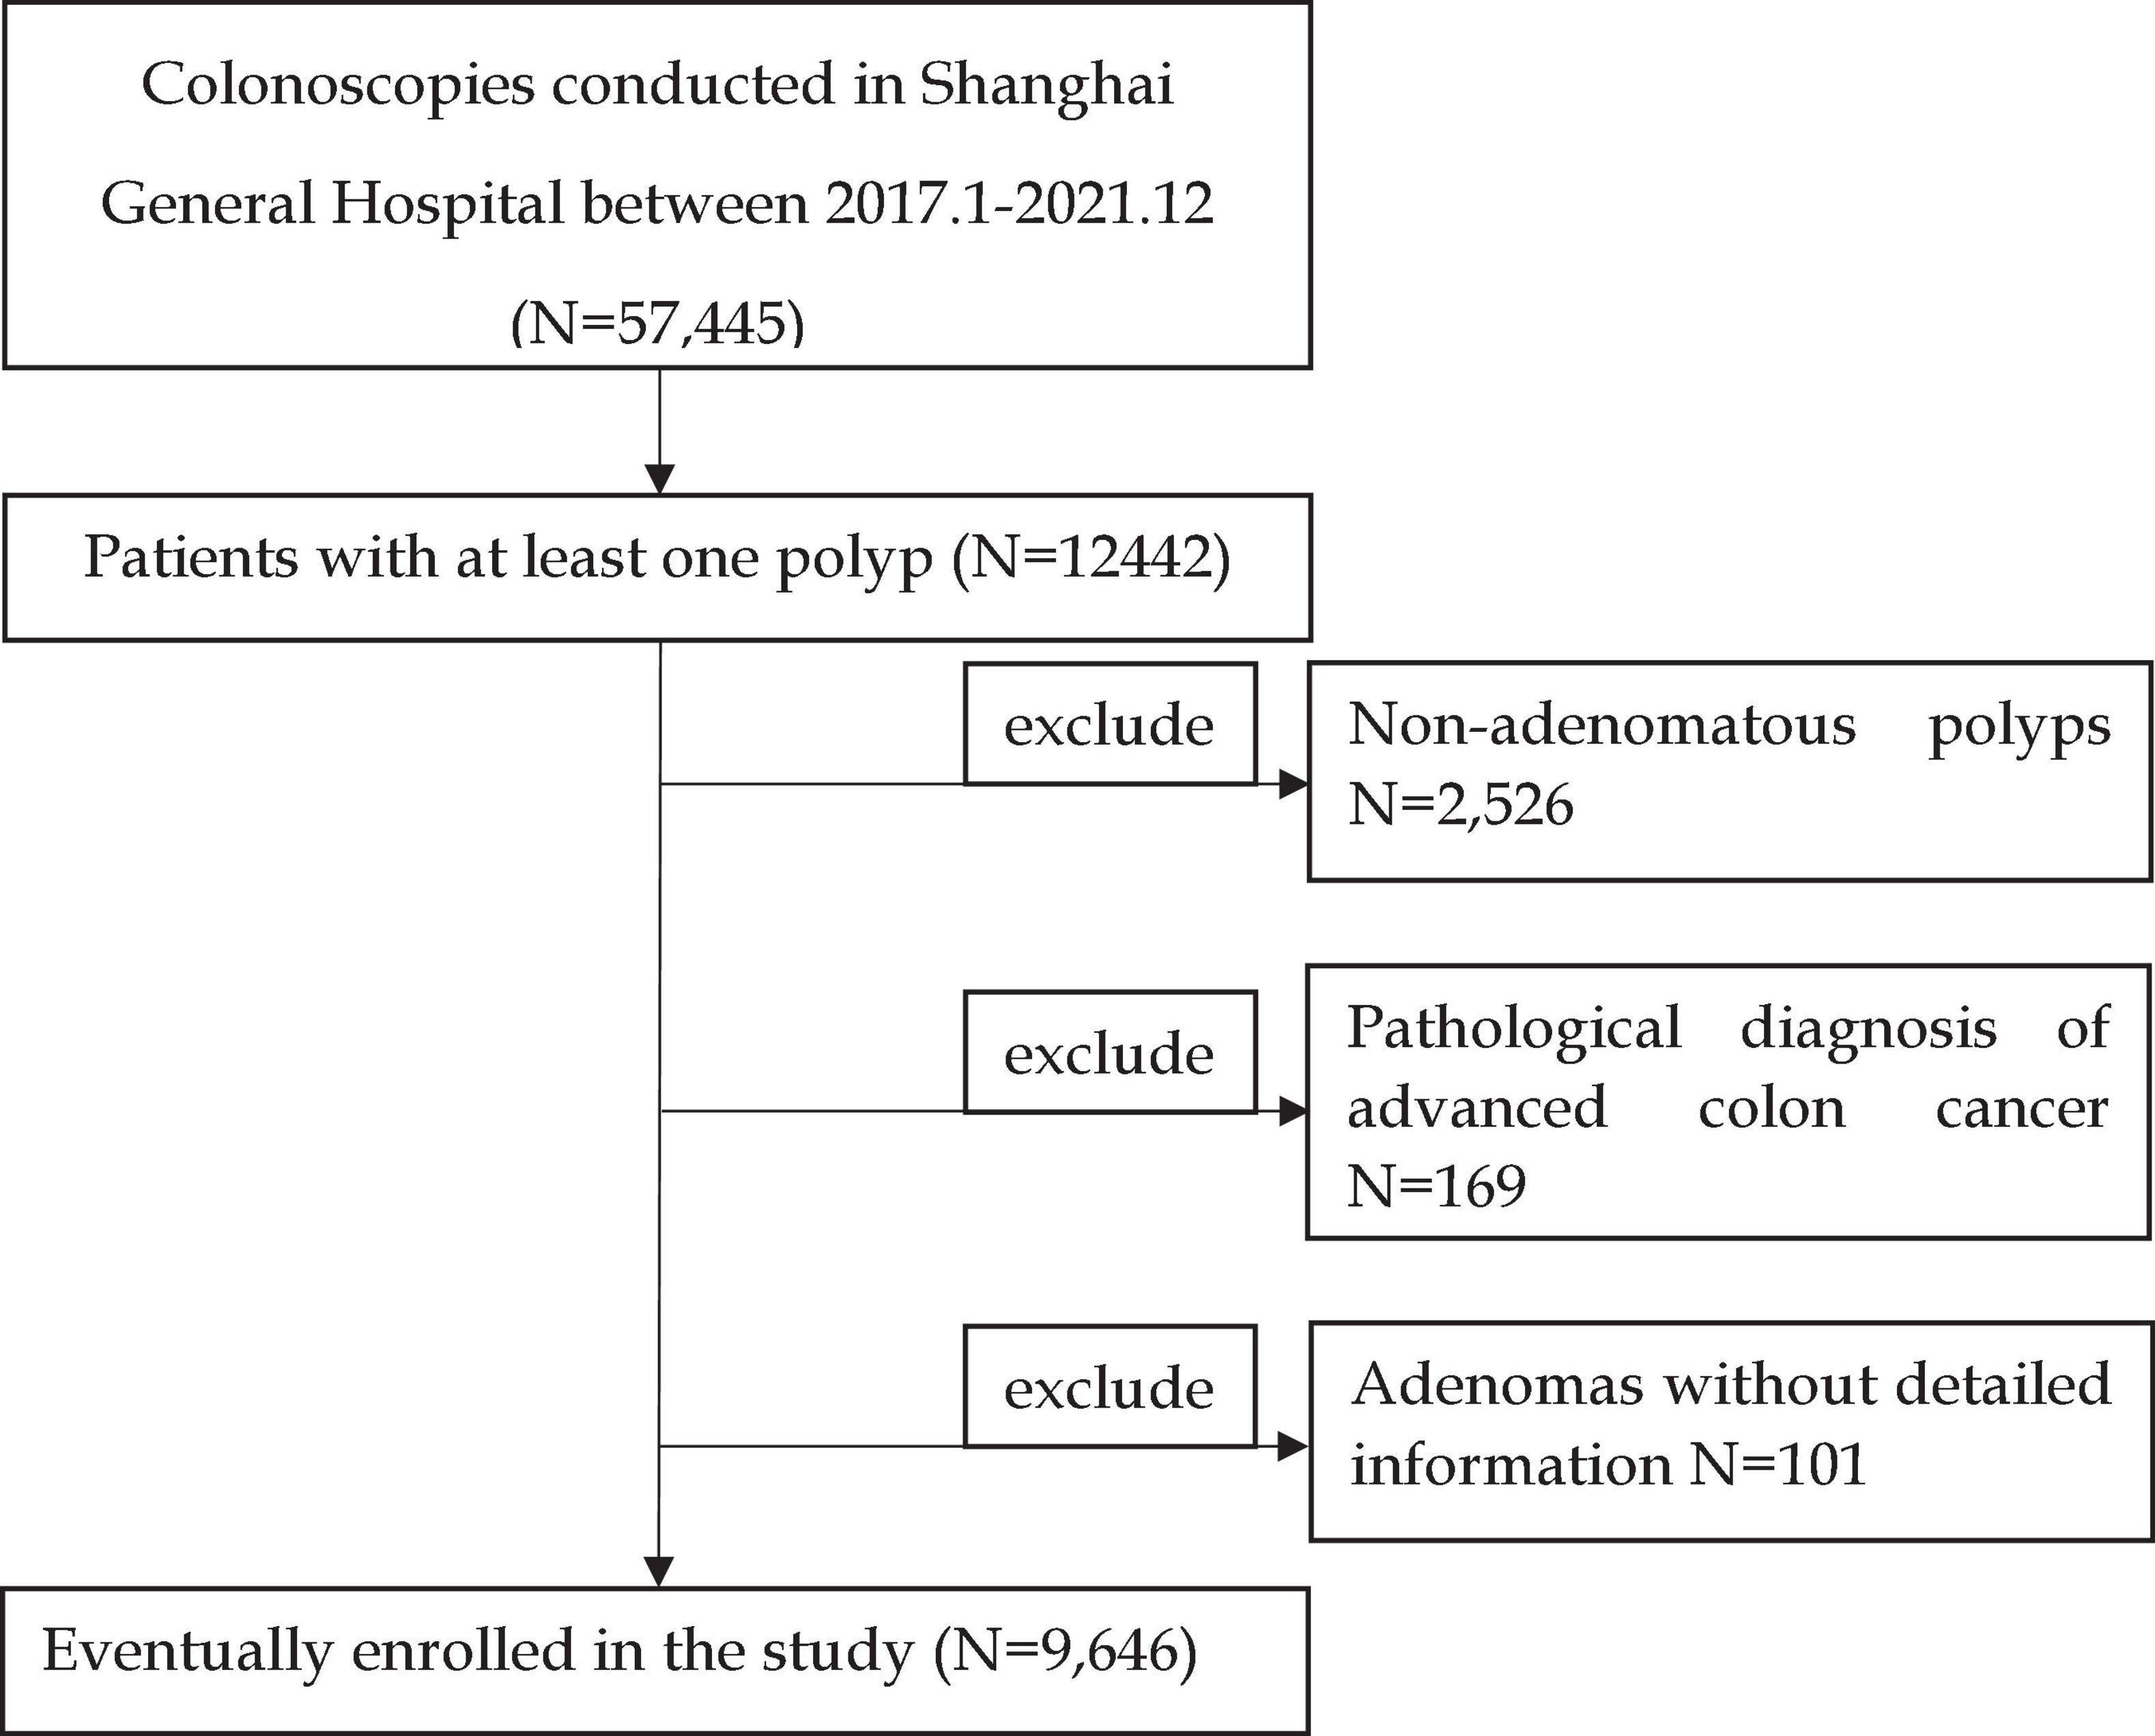 Risk factor analysis of malignant adenomas detected during colonoscopy